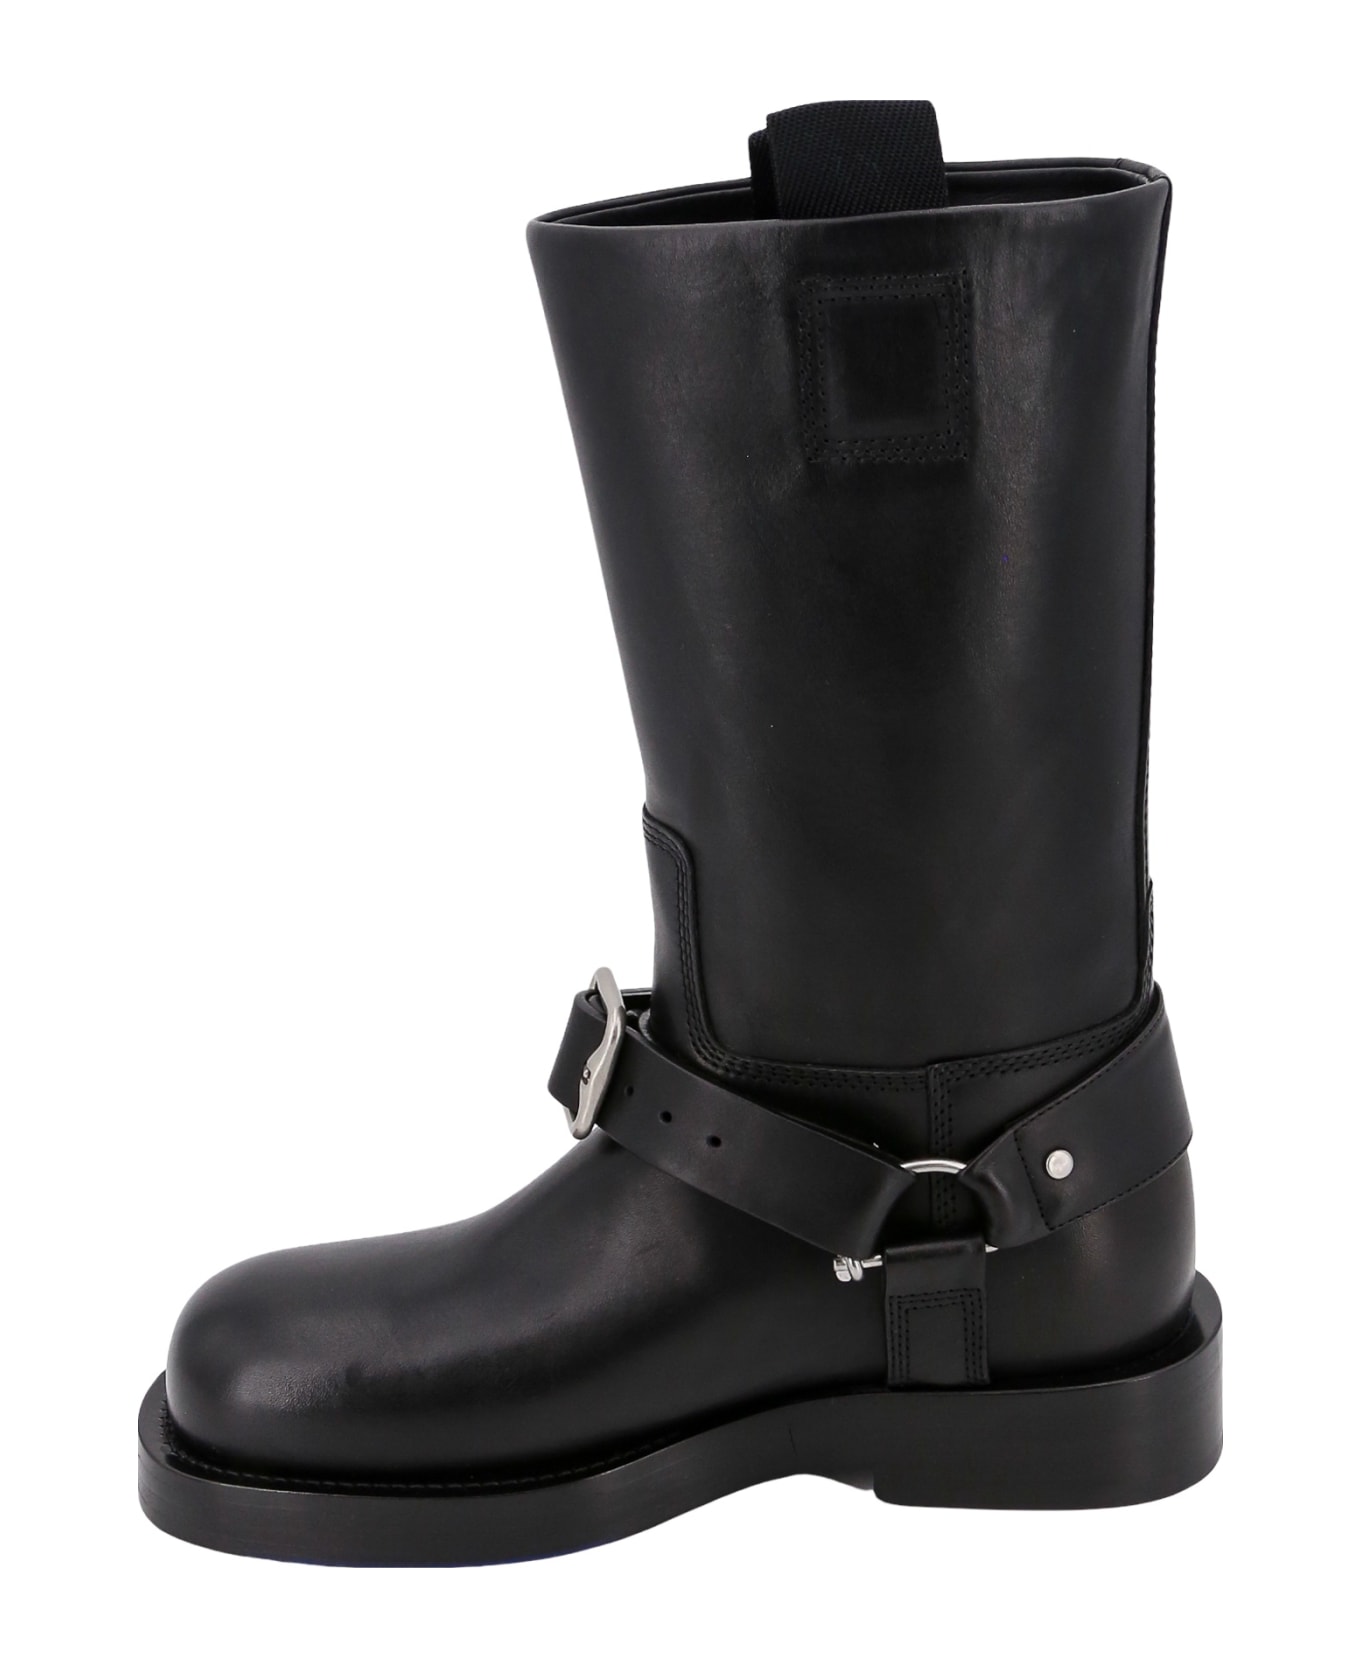 Burberry Buckle Detailed Boots - Black